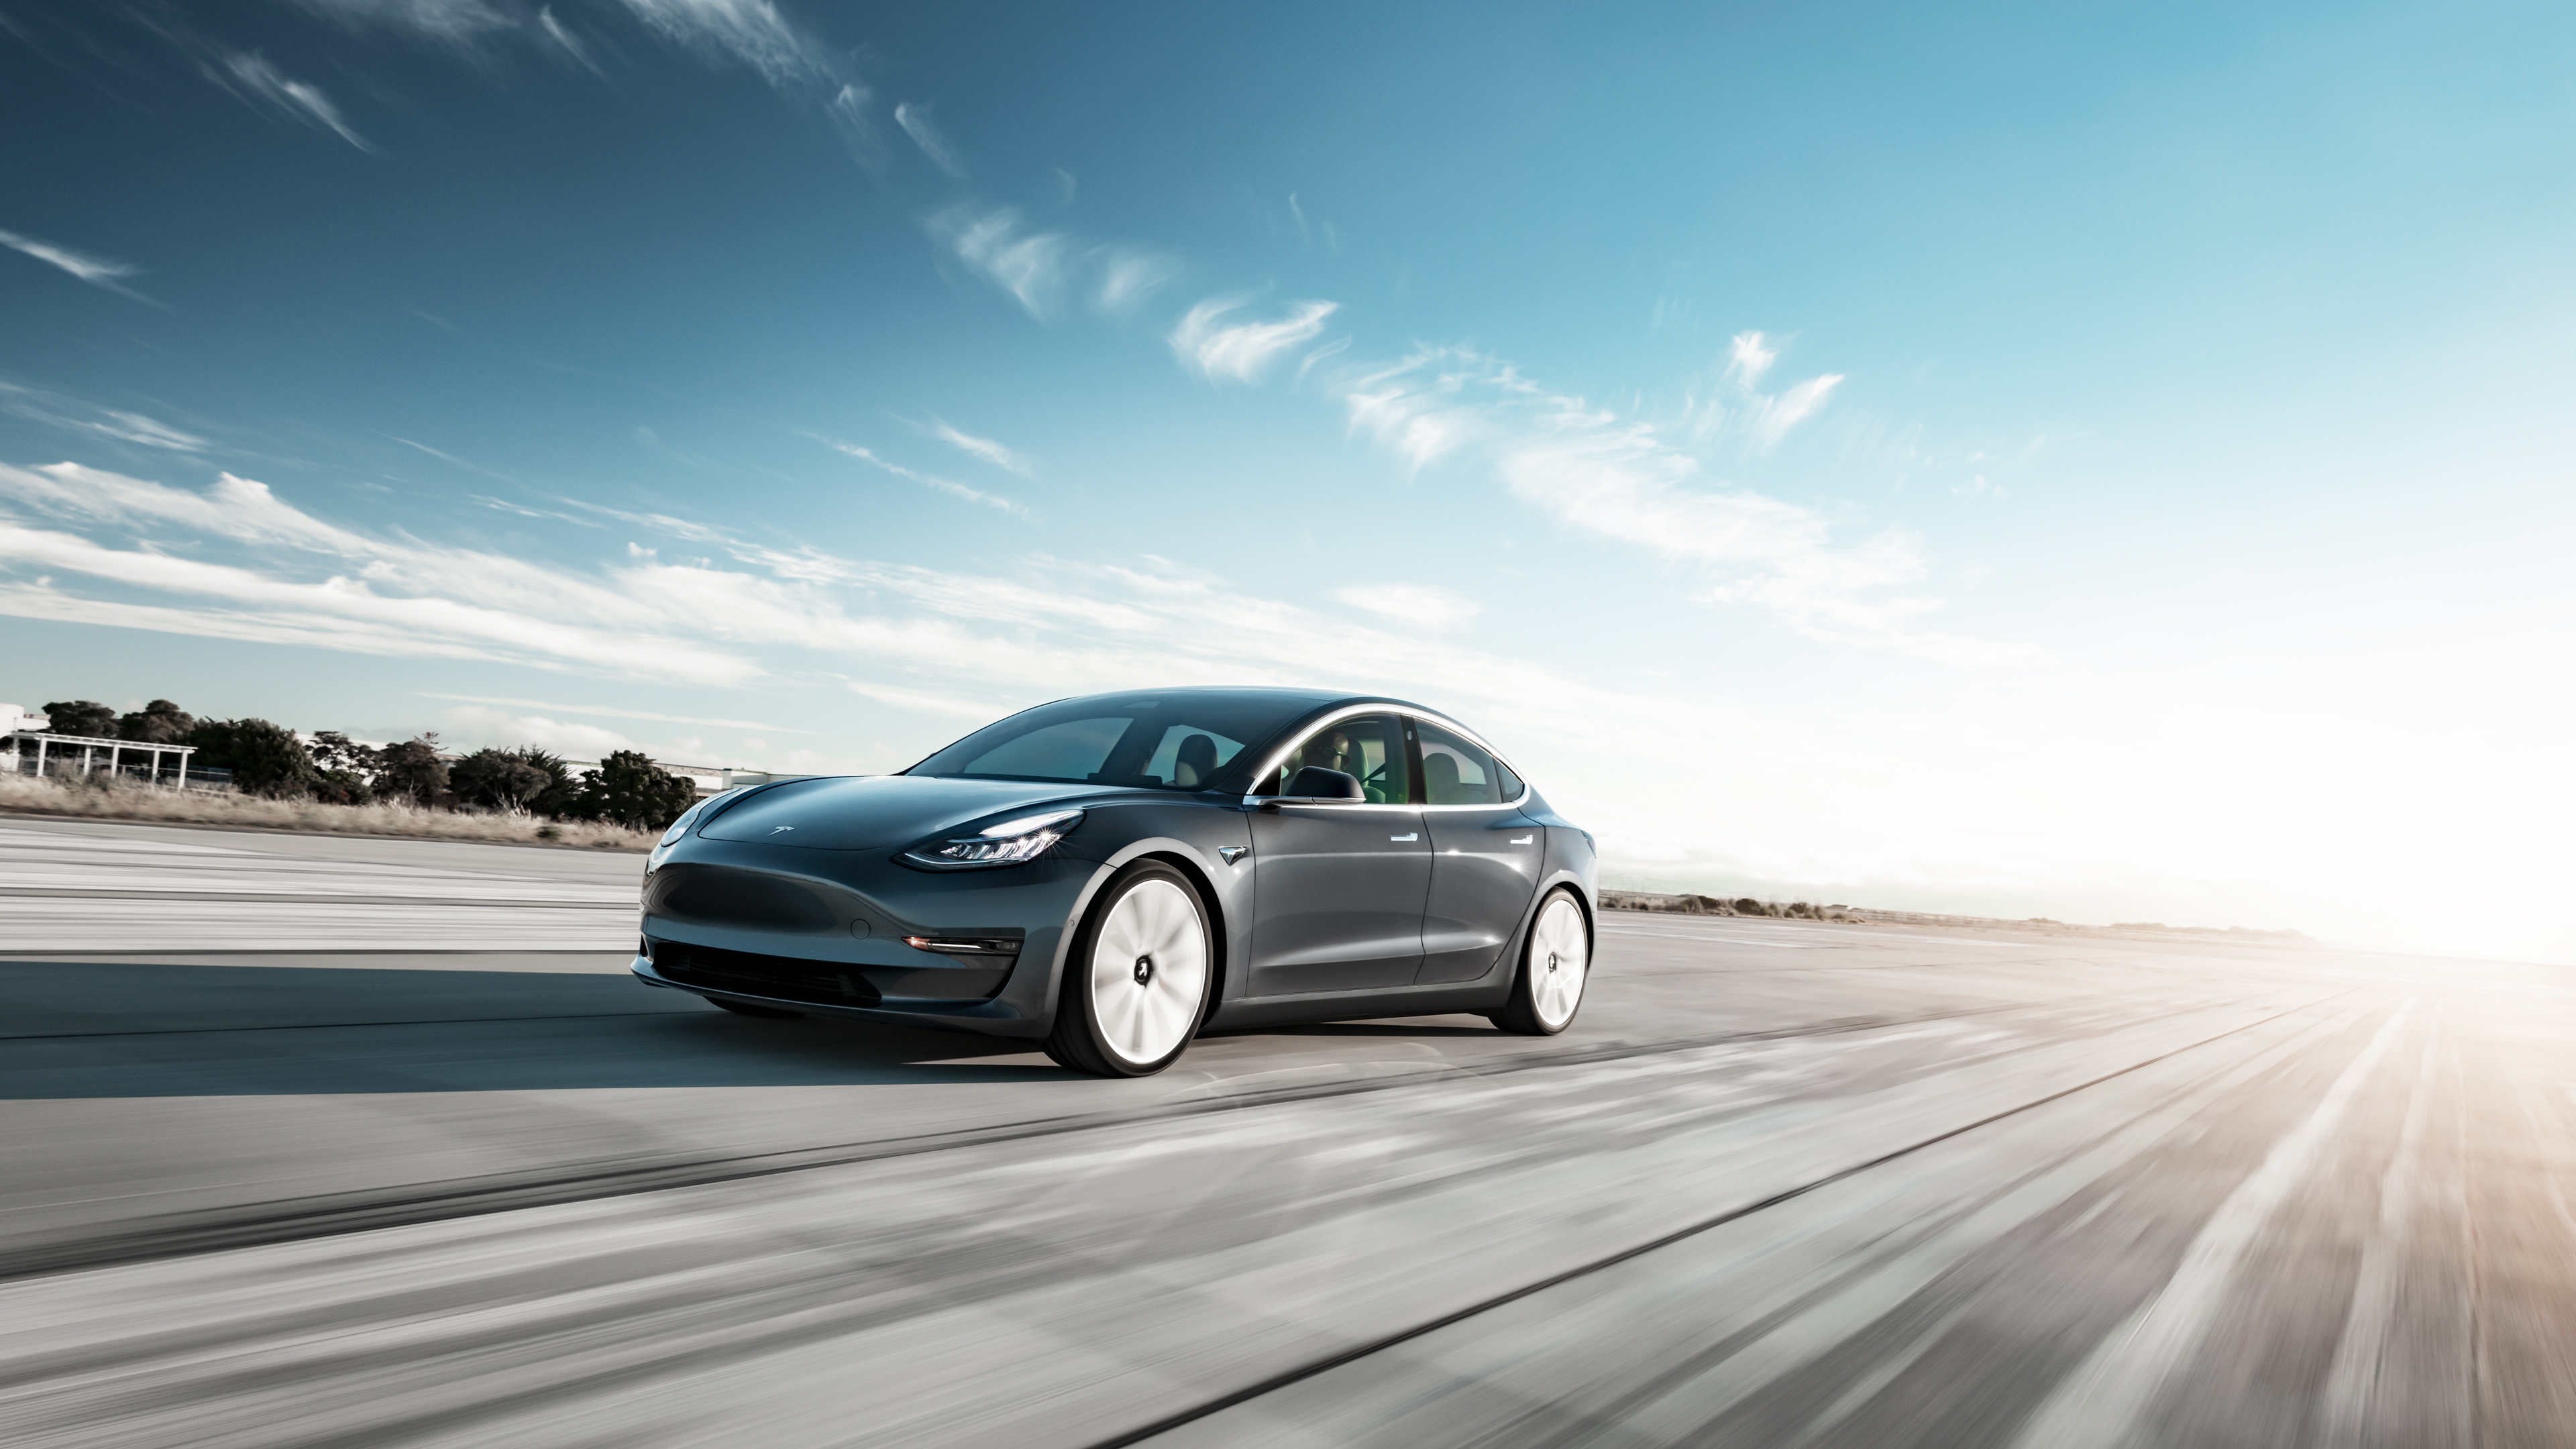 Tesla’s US-made Model 3 vehicles now come equipped with wireless charging and USB-C ports